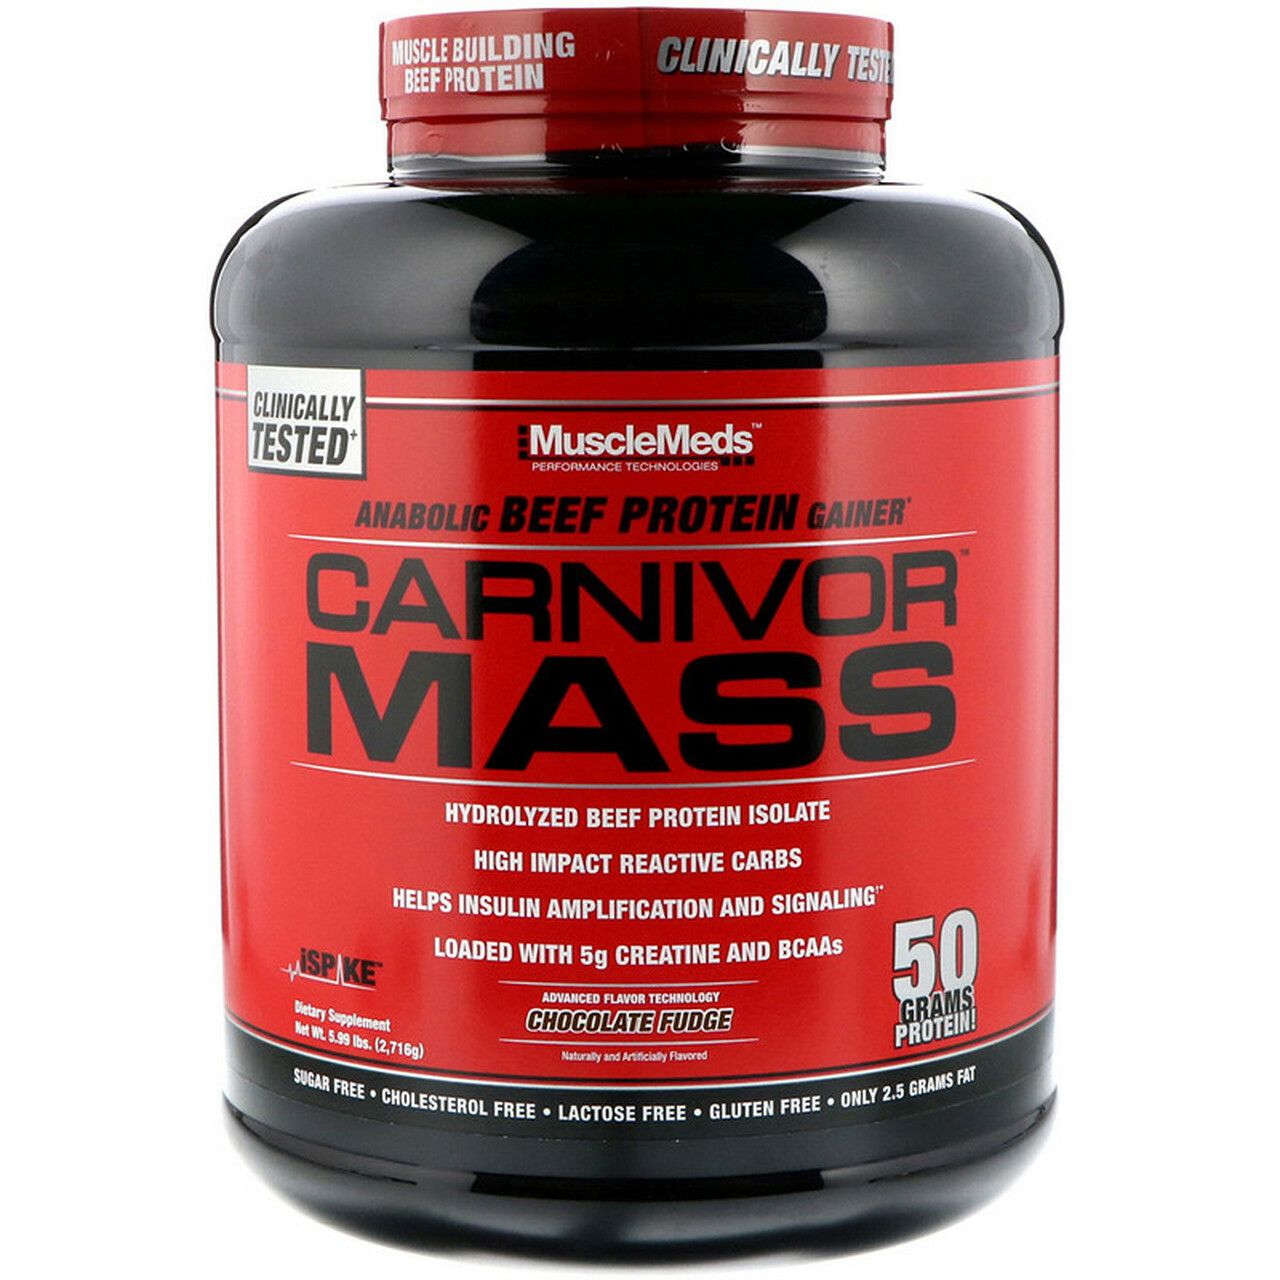 MUSCLEMEDS - CARNIVOR MASS - ANABOLIC BEEF PROTEIN GAINER - 2534 G